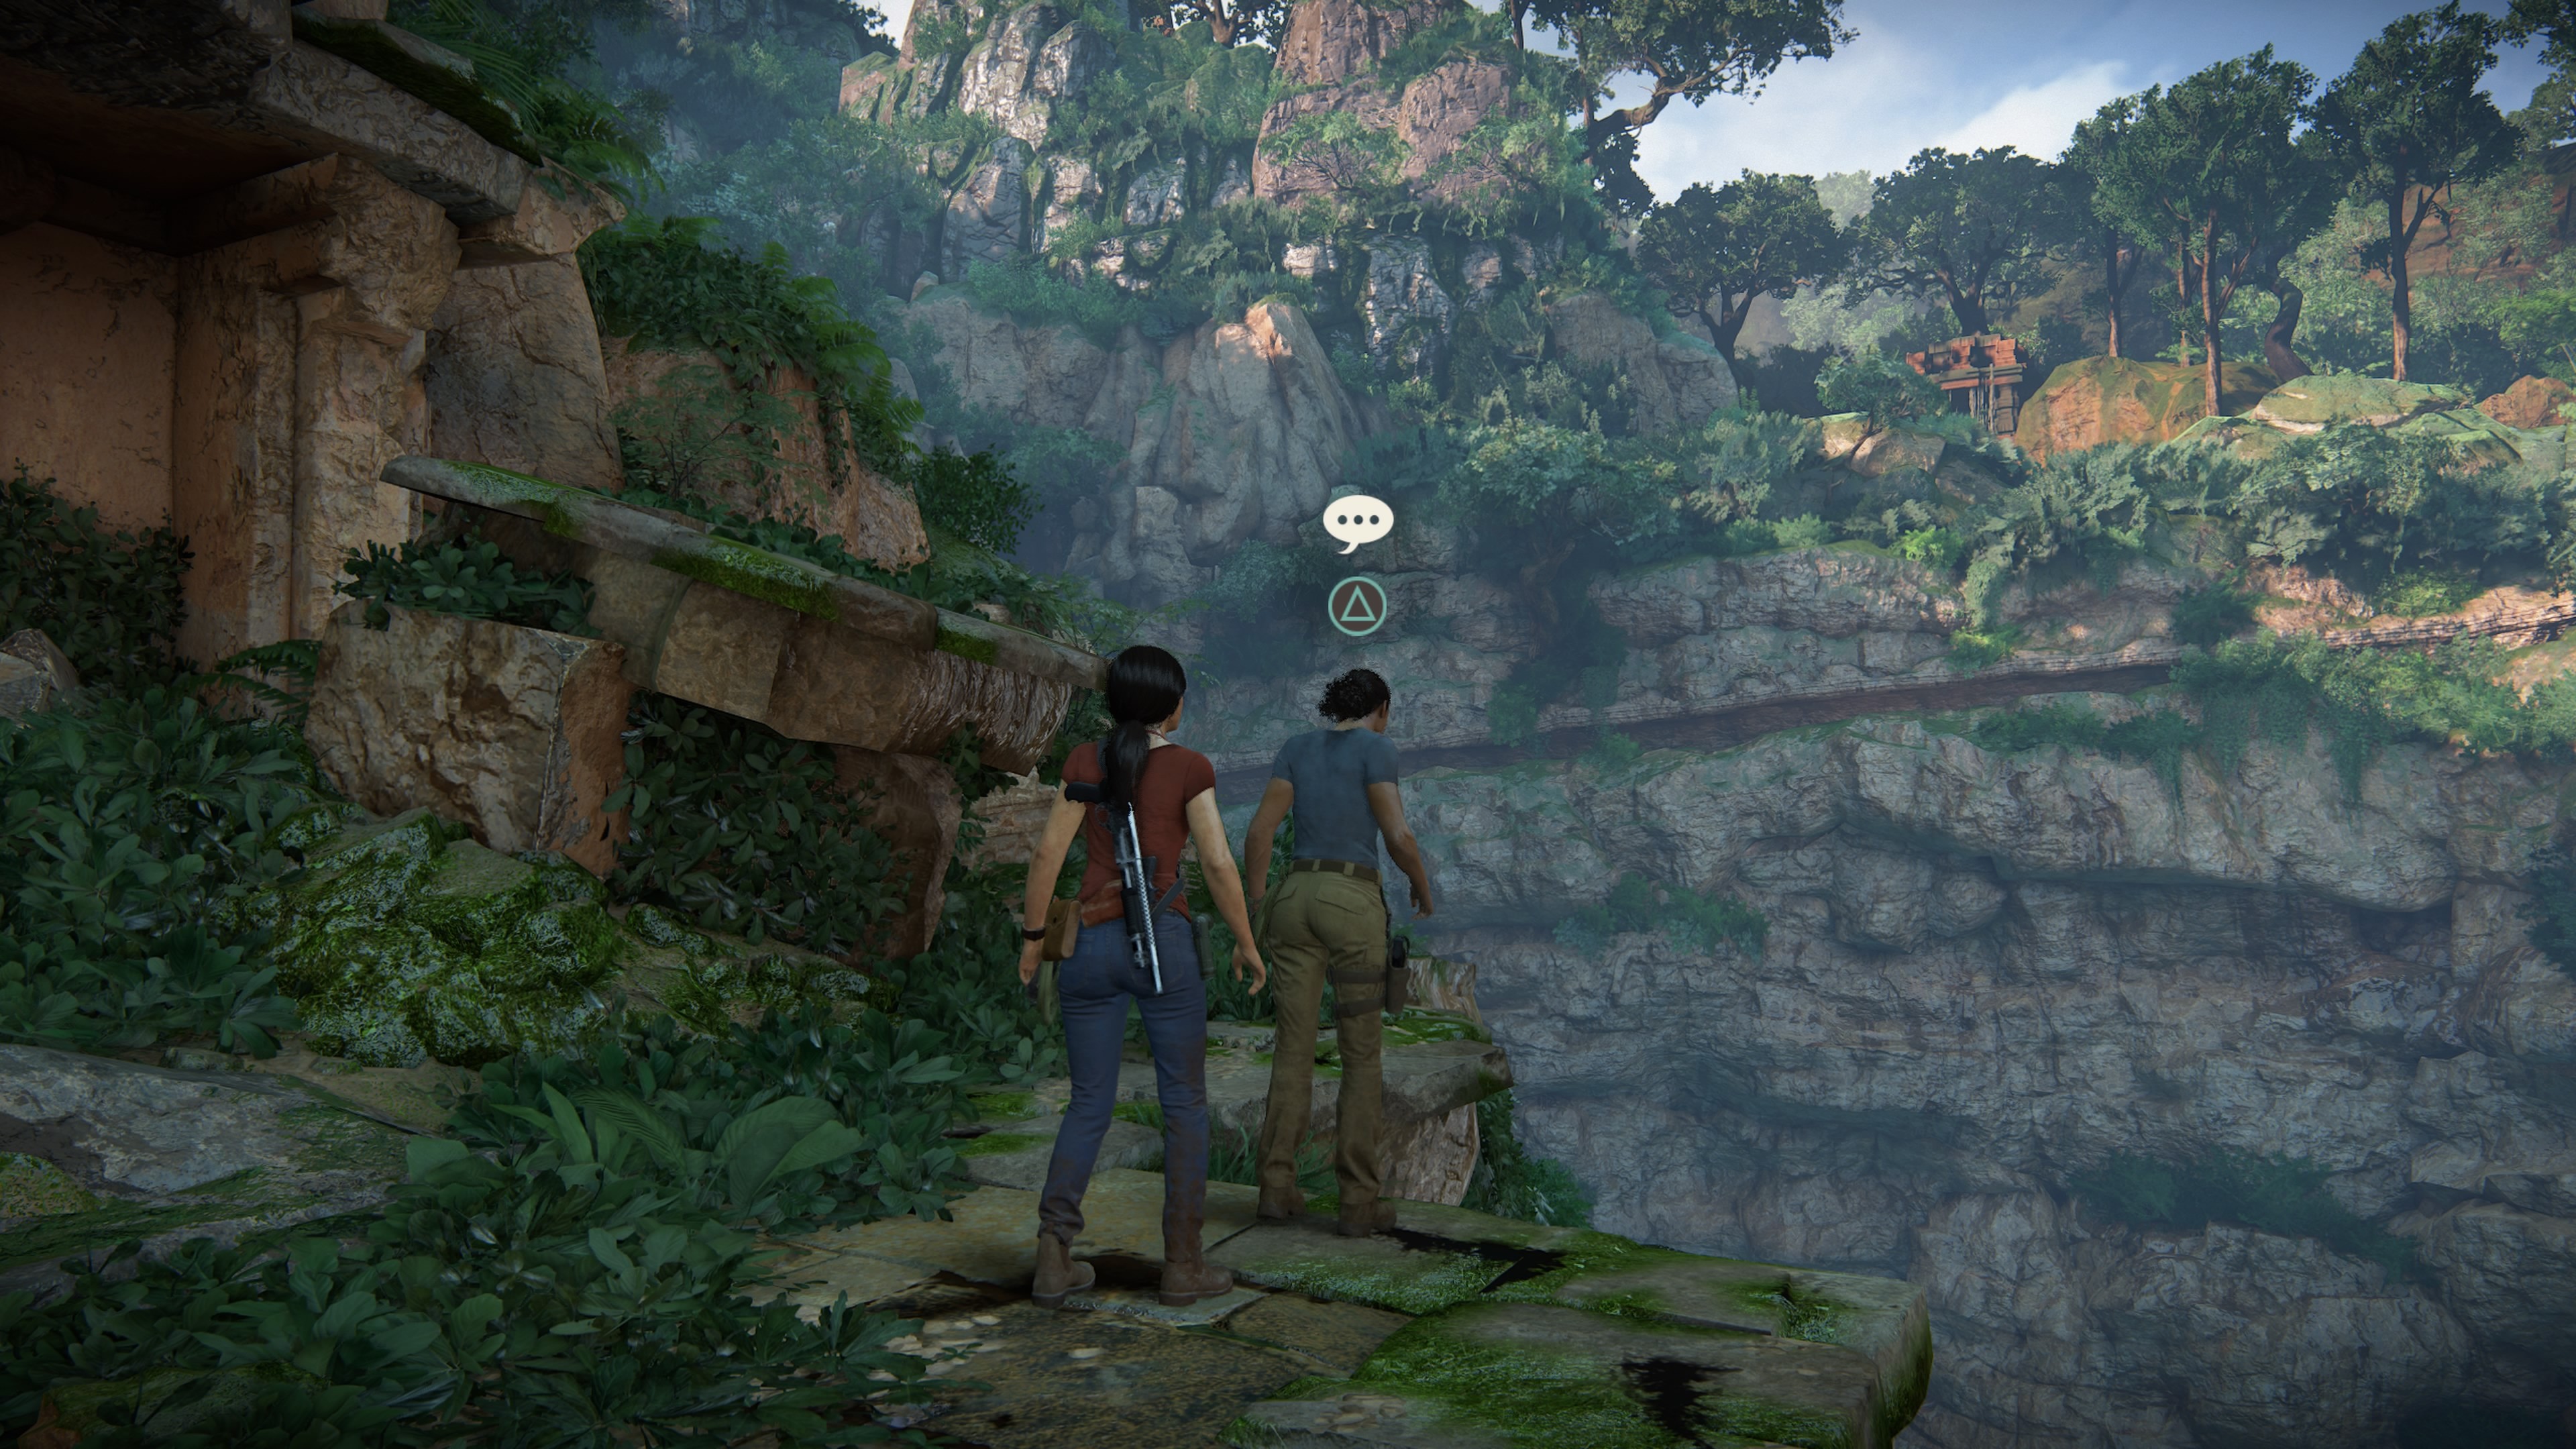 Uncharted 3: Drake's Deception Remastered Trophy Guide & Road Map